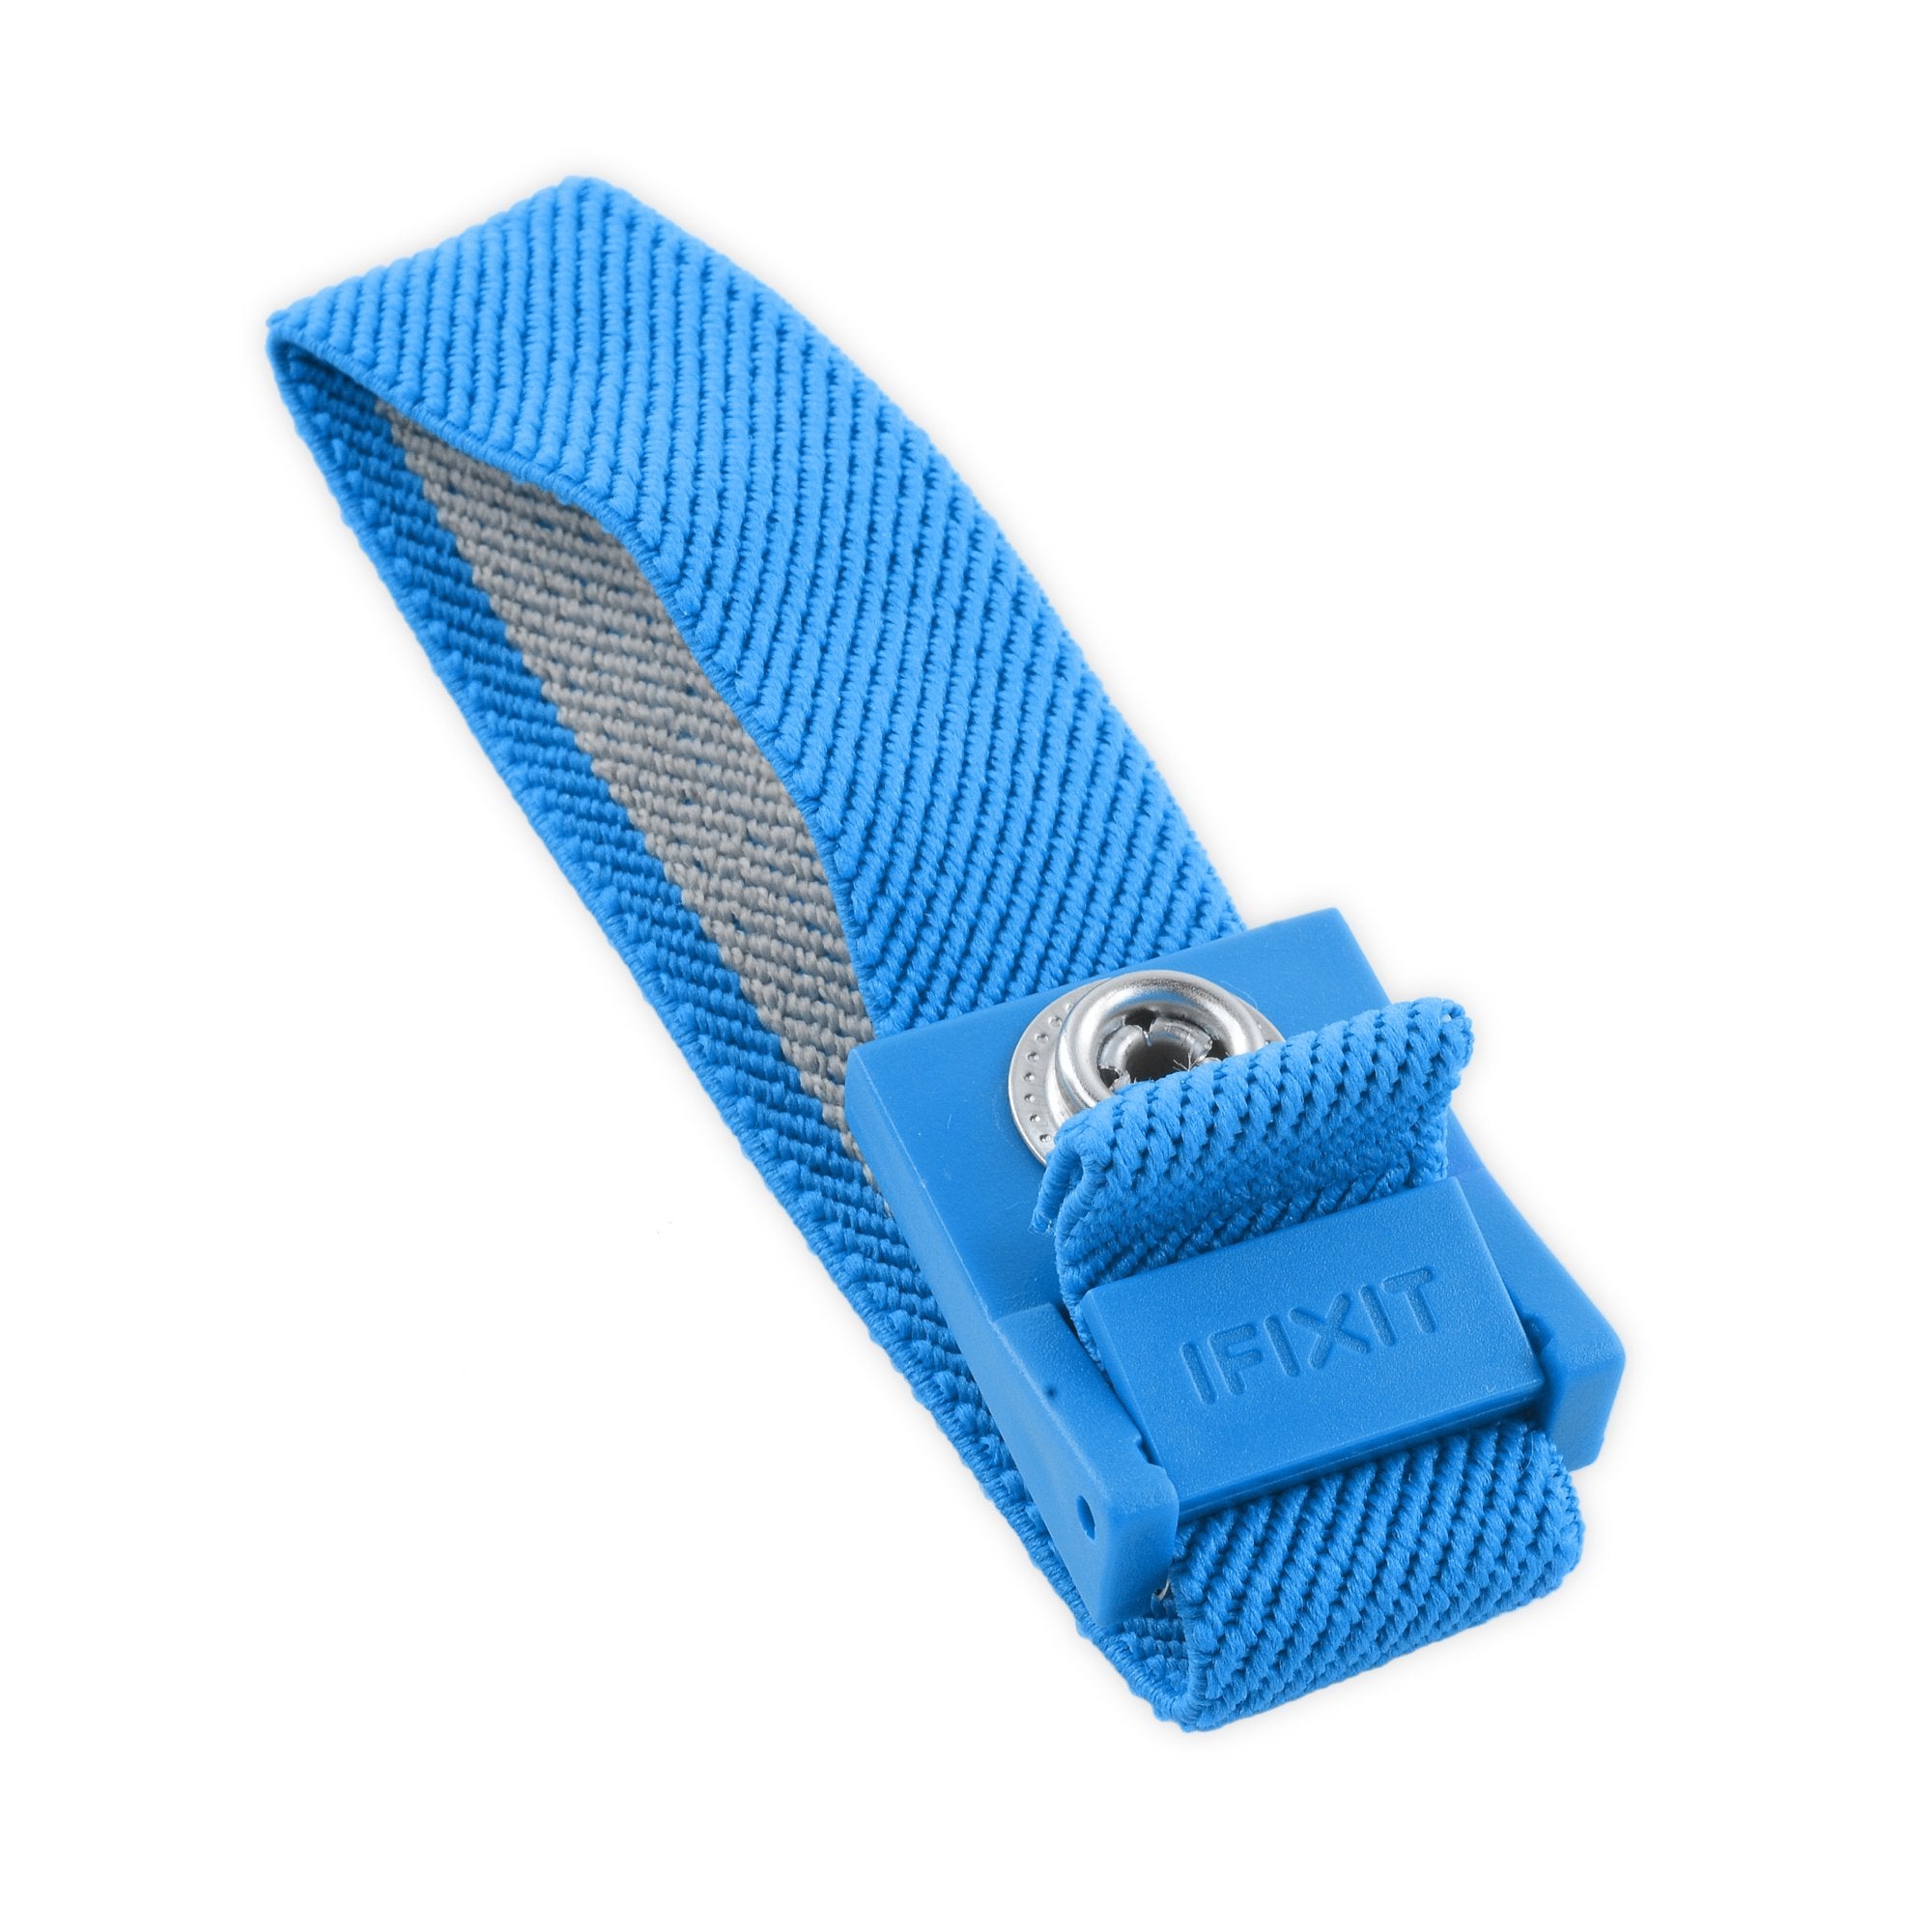 Anti-Static Wrist Strap: ESD-Safe Bracelet and Grounding Wire